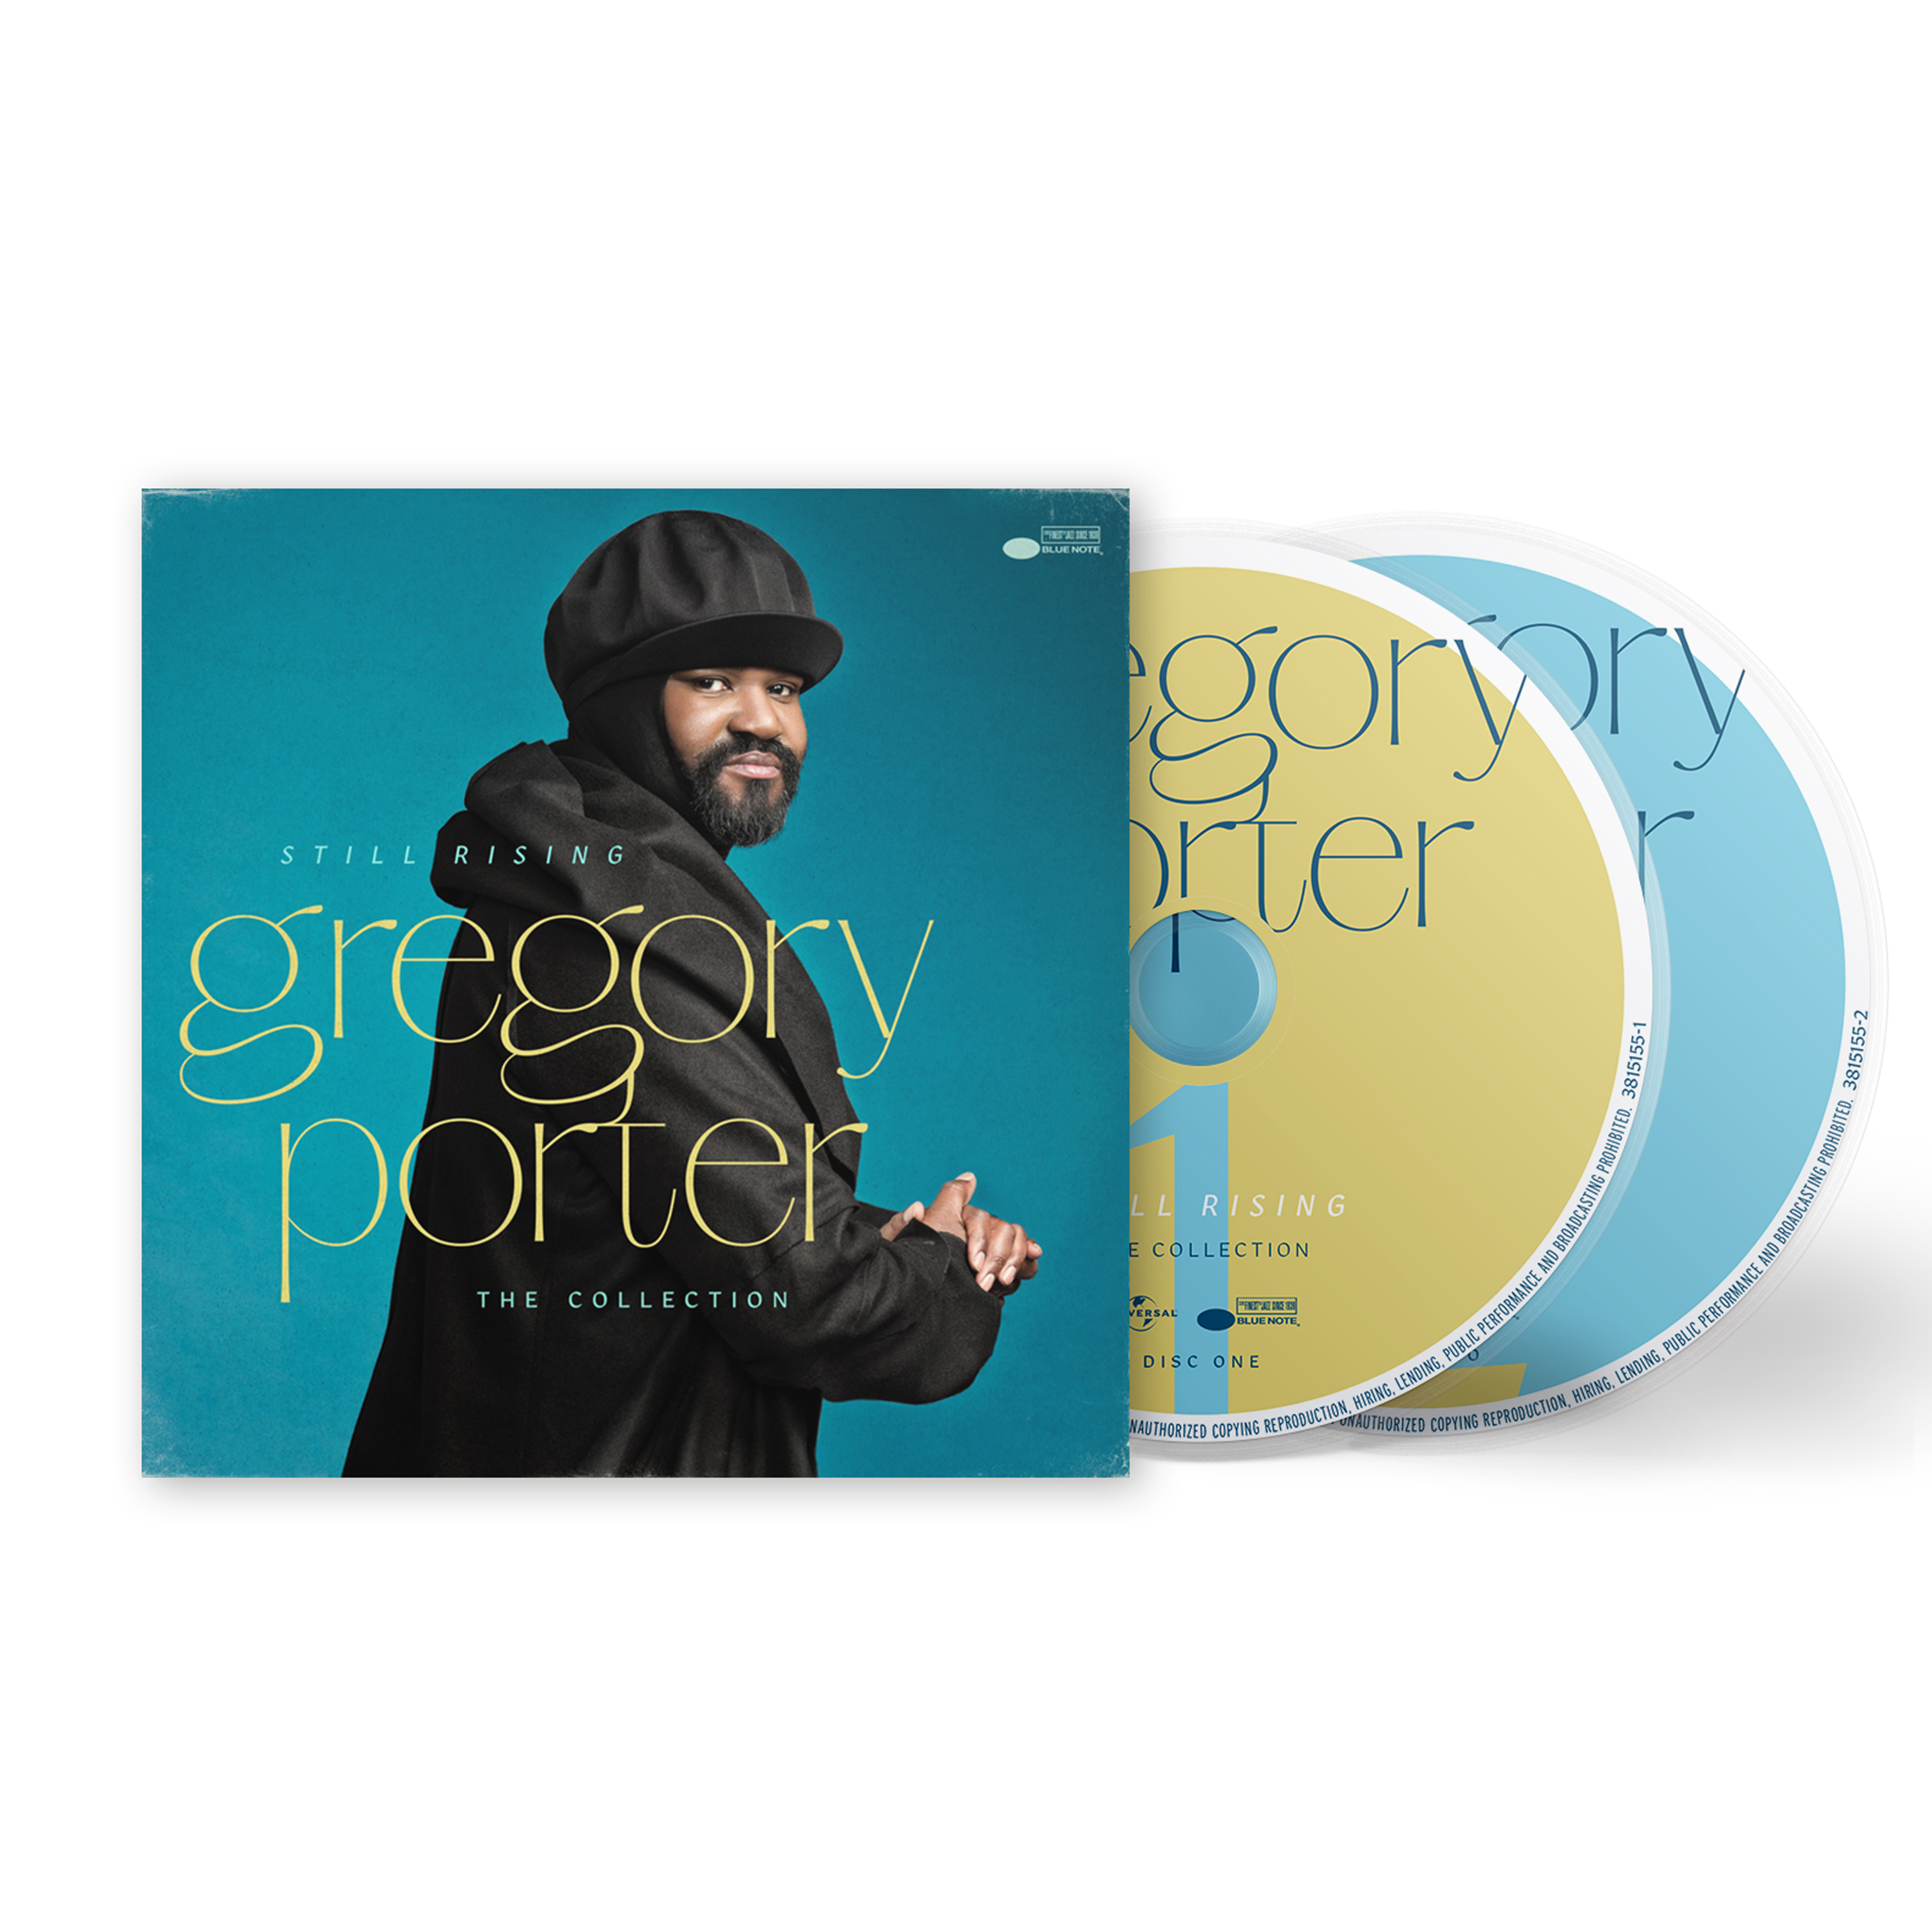 CD Shop - PORTER GREGORY STILL RISING-THE COLLECTION / DIGIPACK